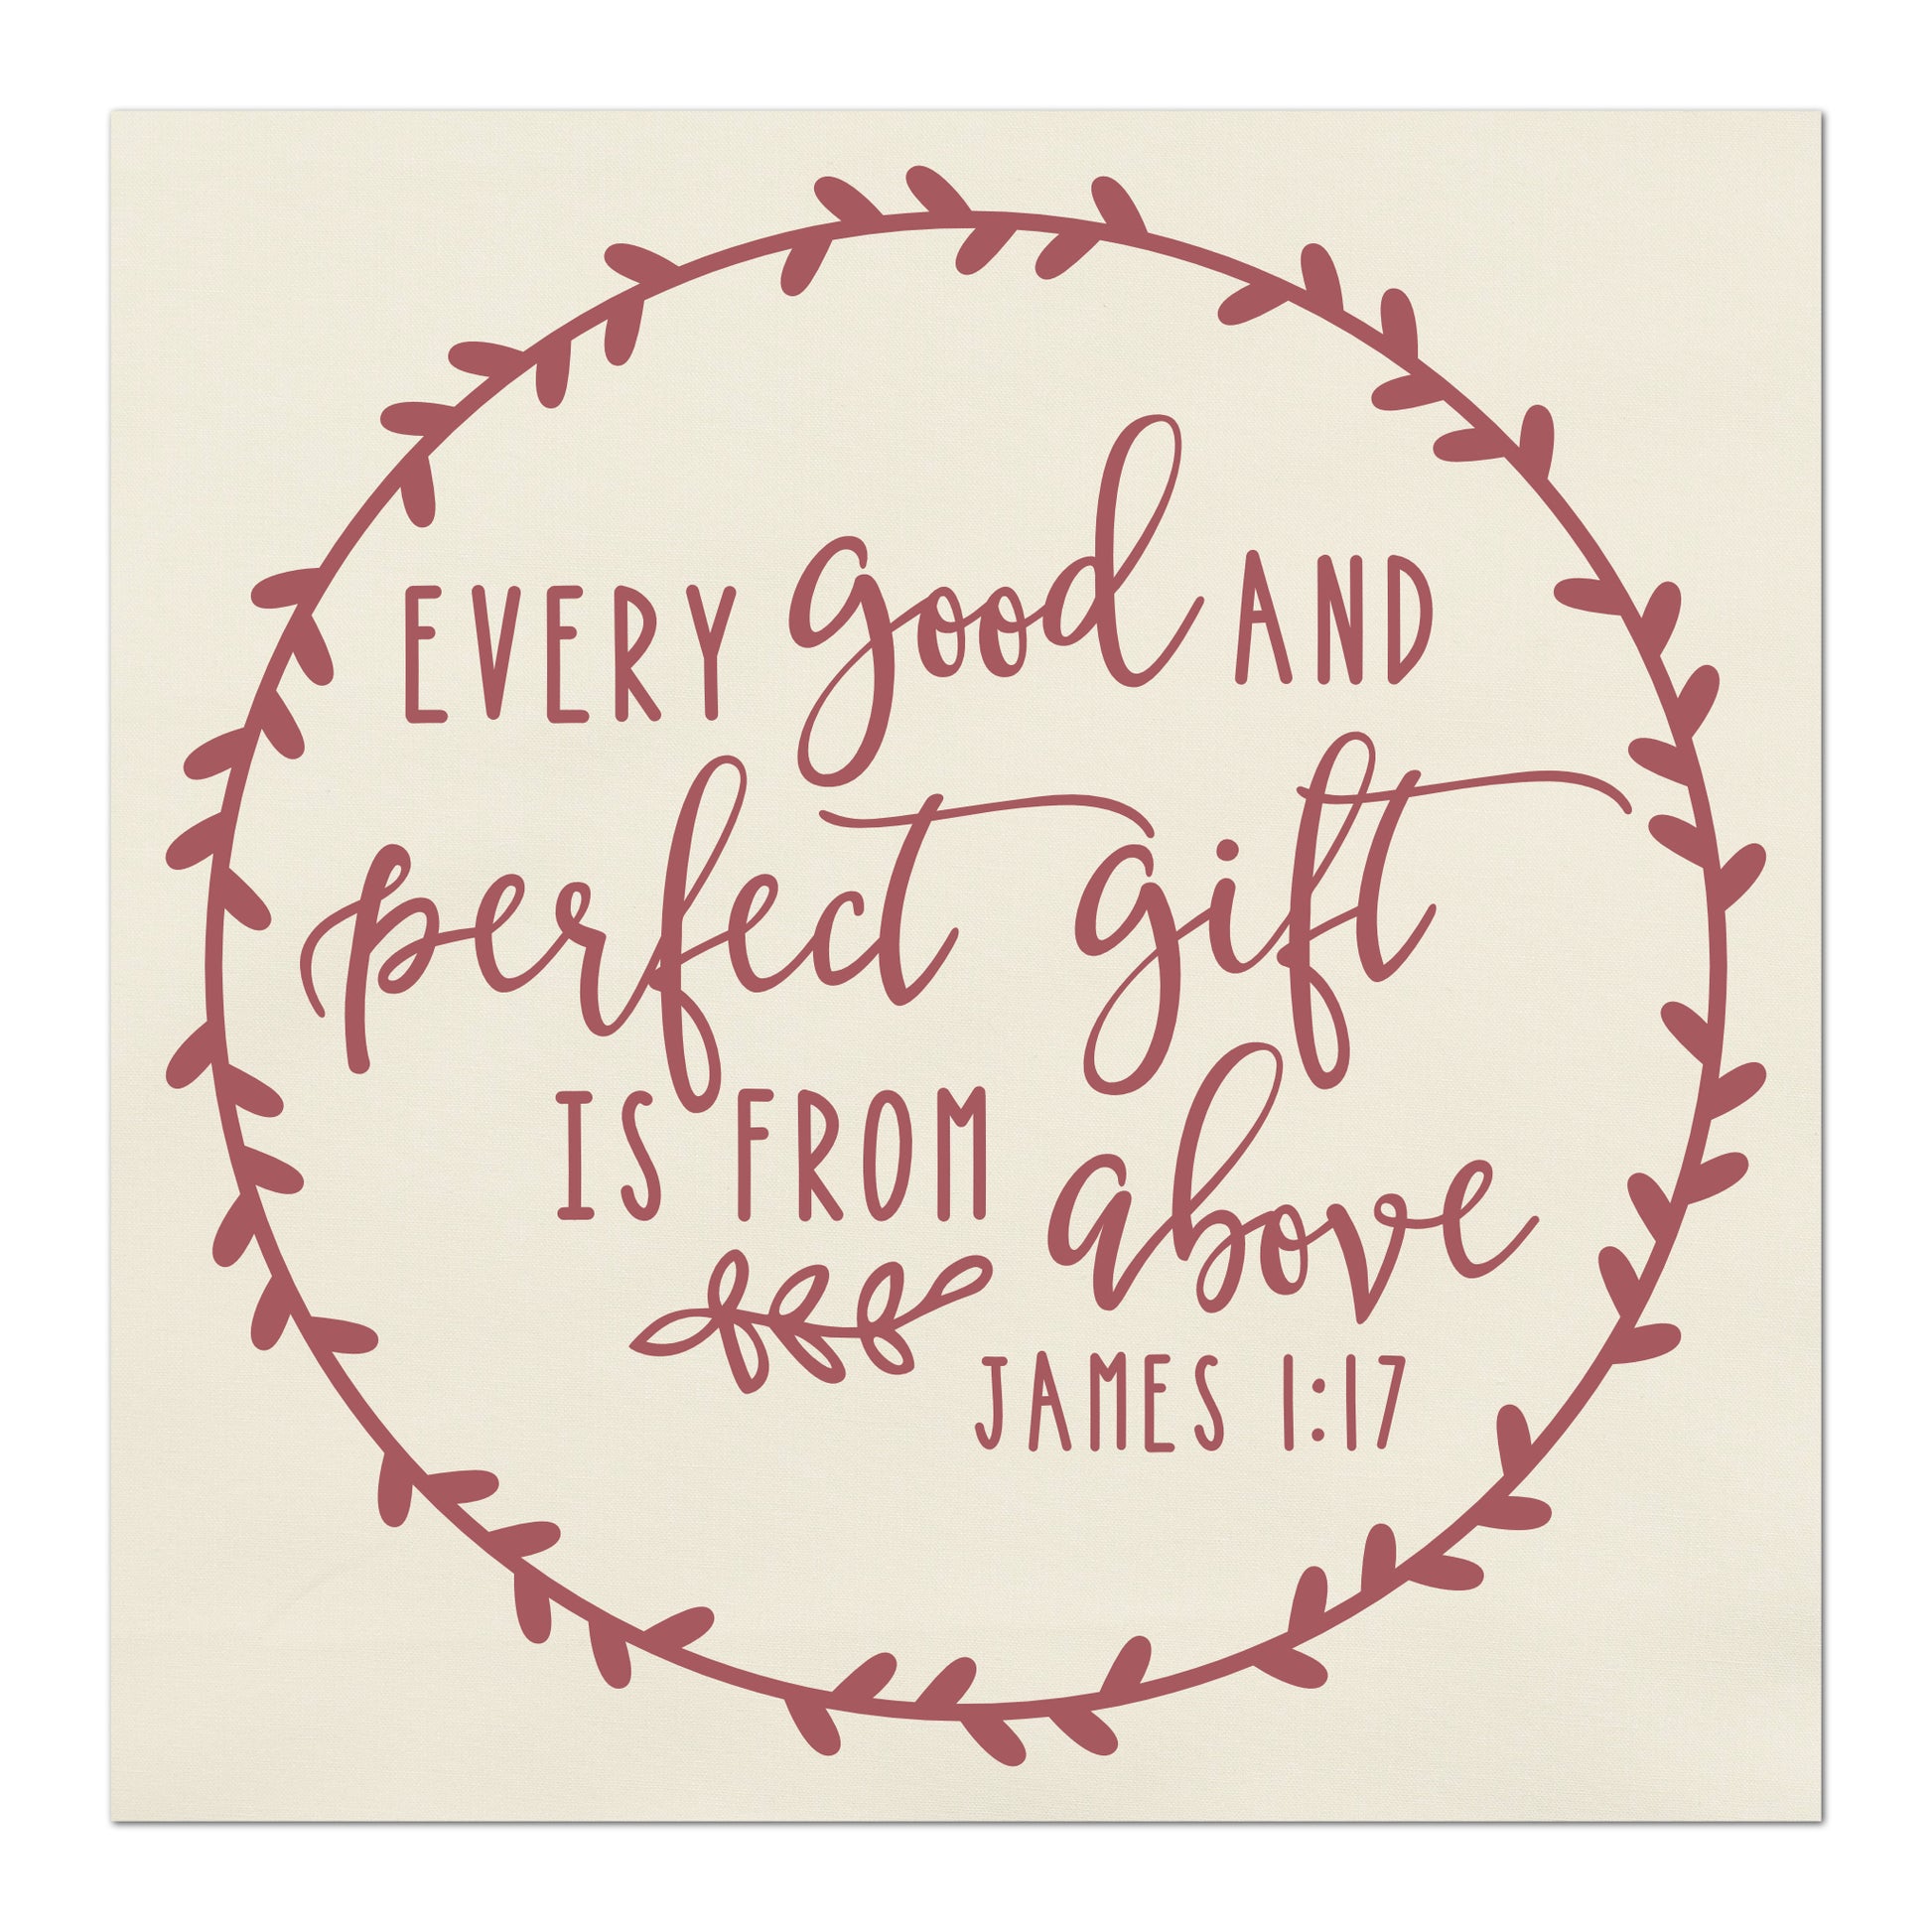 Every good and perfect gift is from above. - James 1 17, Fabric Panel Print, Quilt Block